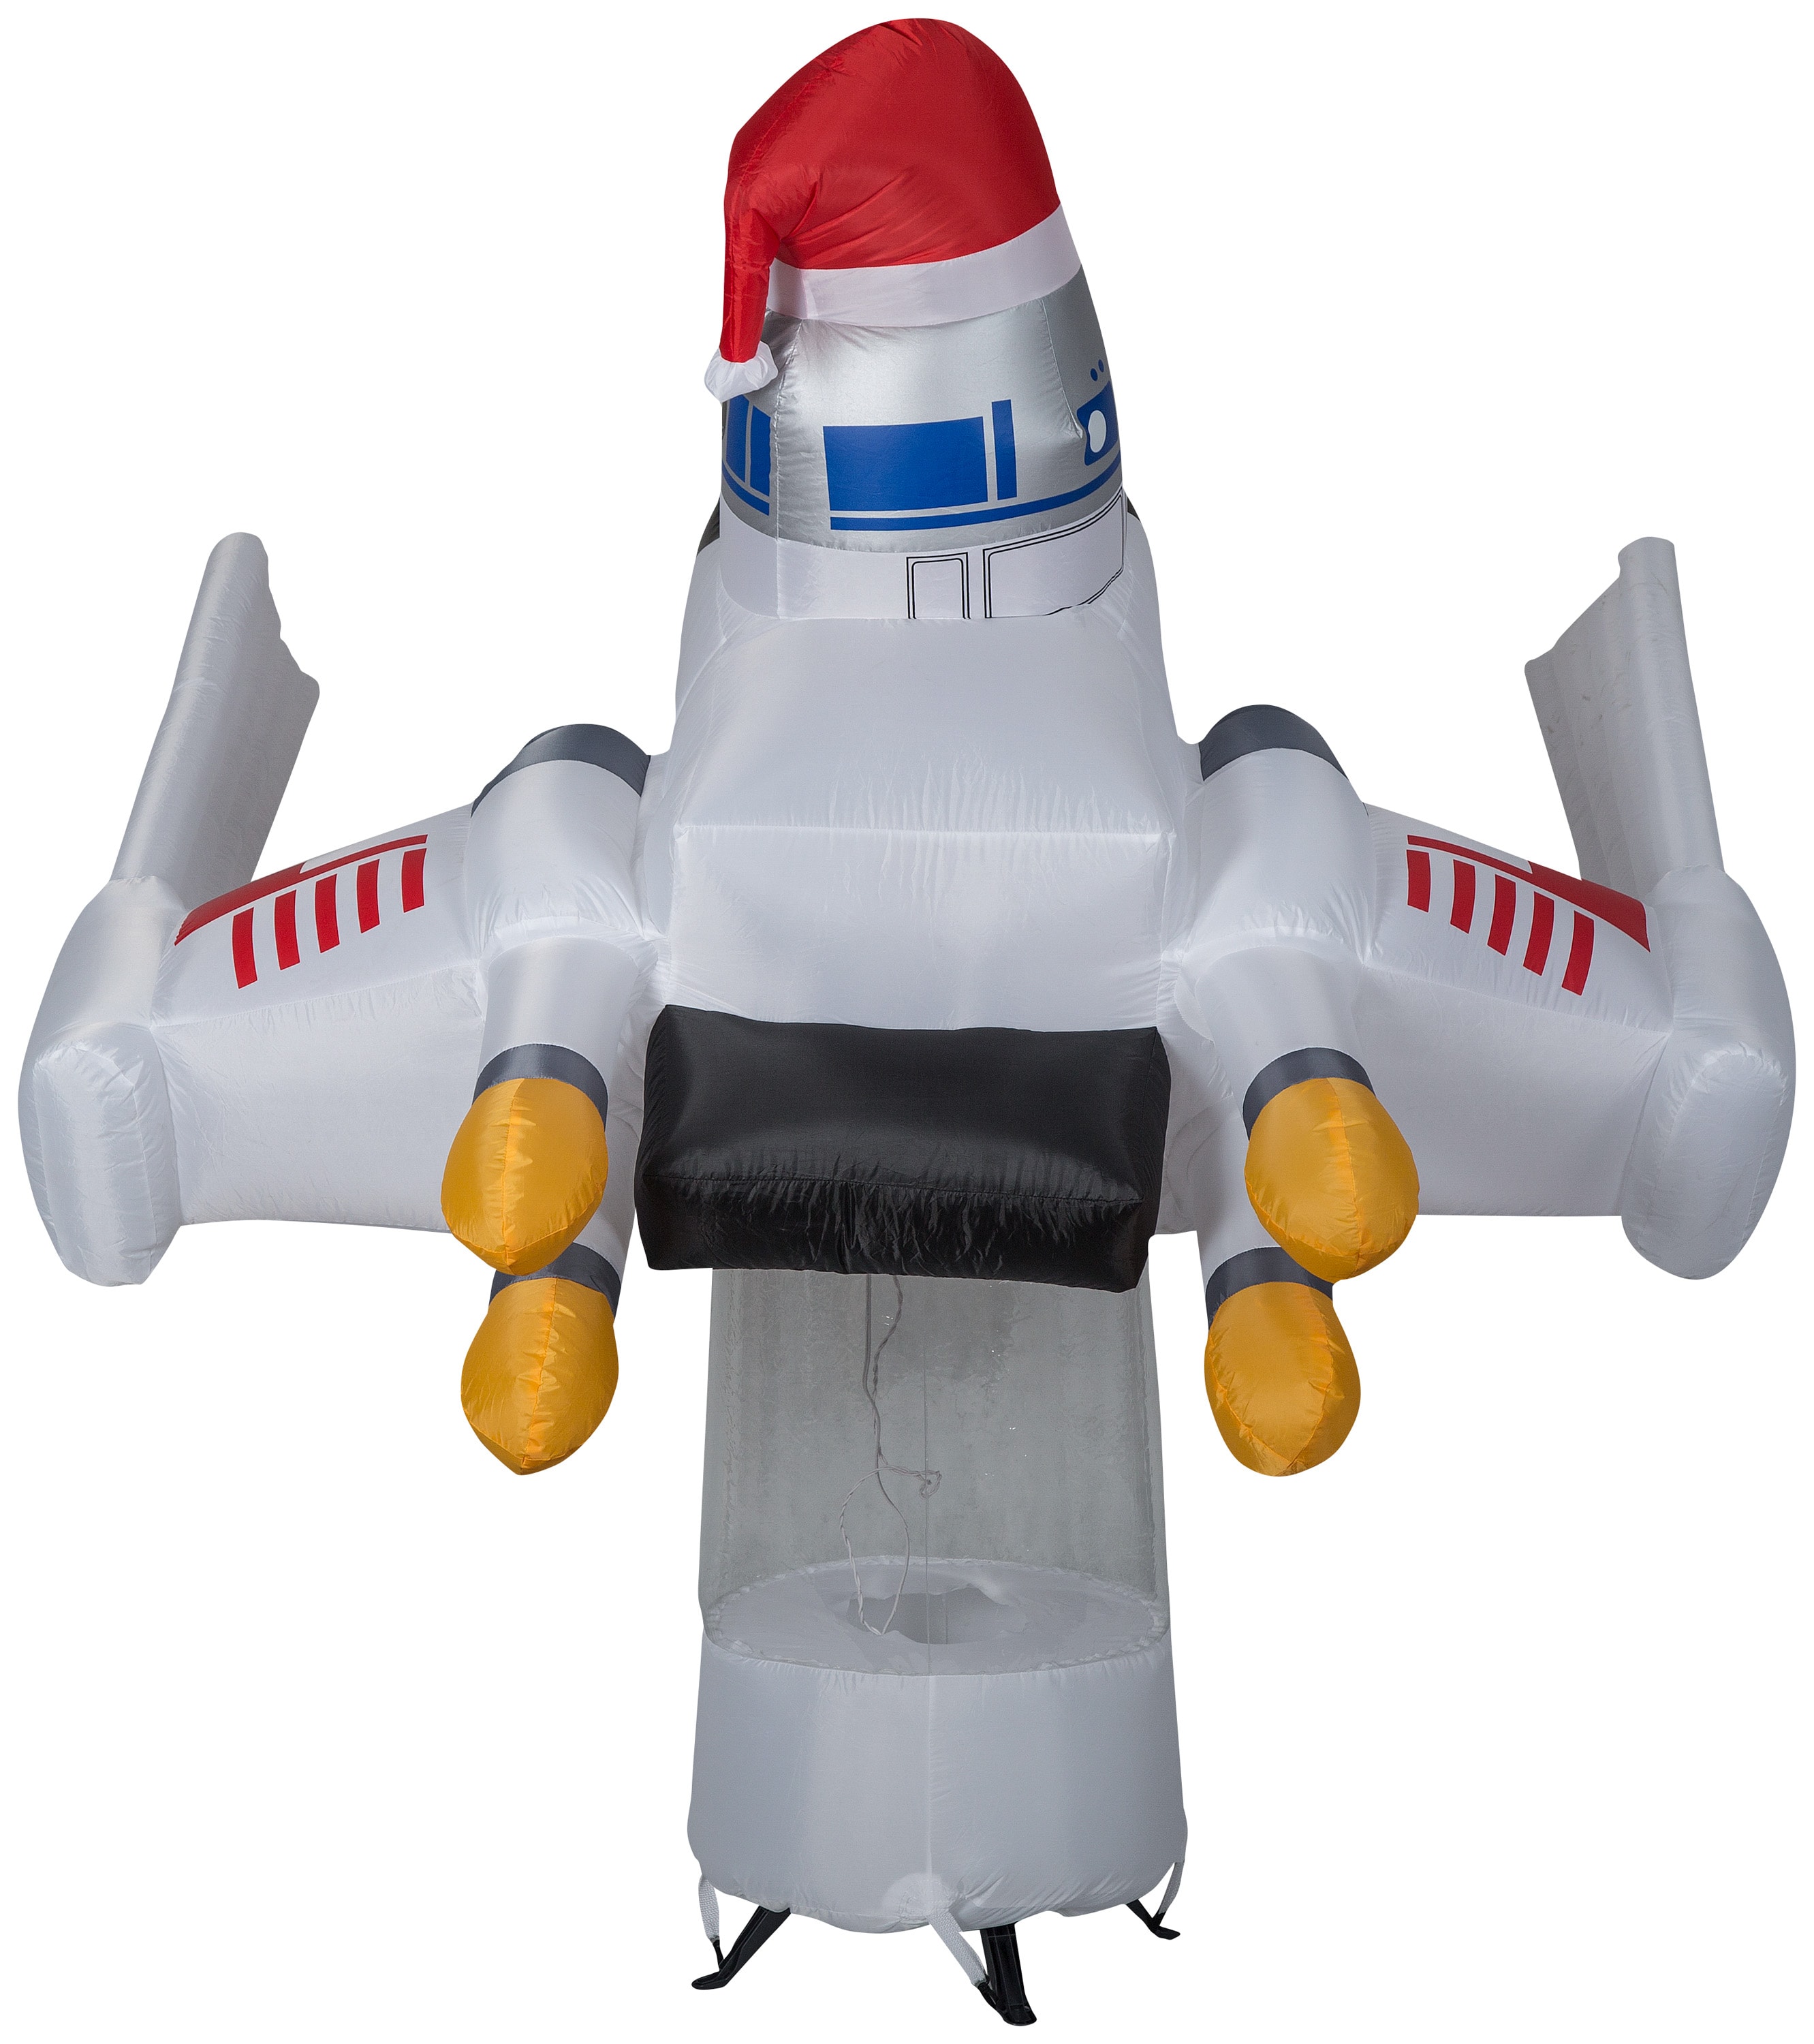 Outdoor Star Wars Christmas Inflatable